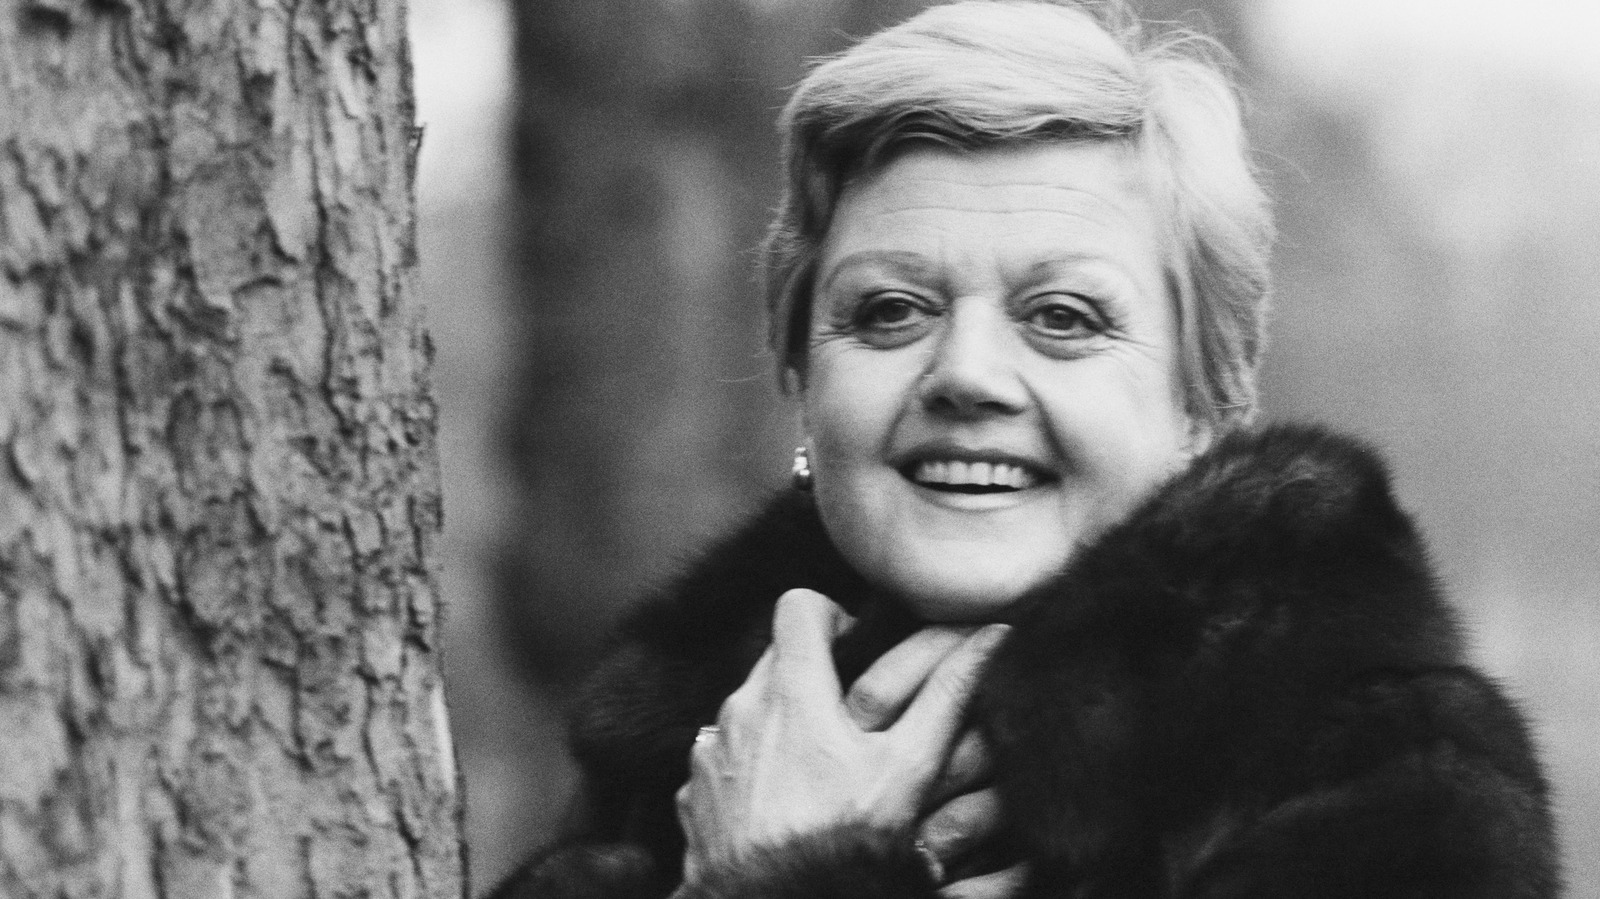 11 Facts About Angela Lansbury's Hit Show Murder, She Wrote